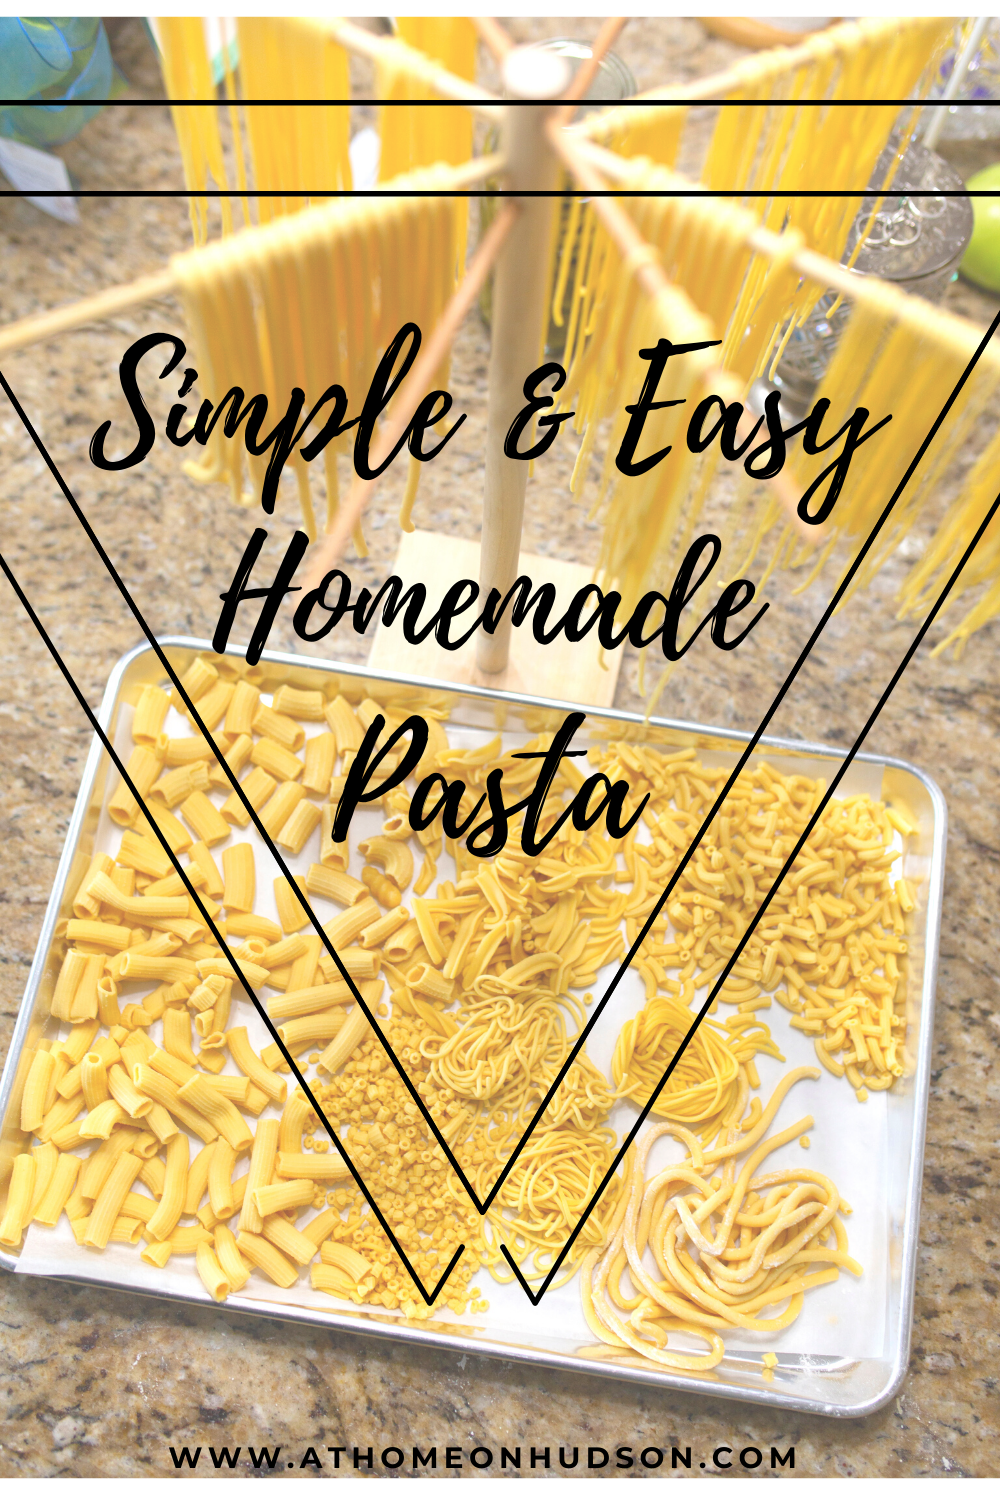 Making your own simple and easy homemade pasta is not only yummy but fun! This is a great activity for all ages. Step-by-step instructions with pictures!